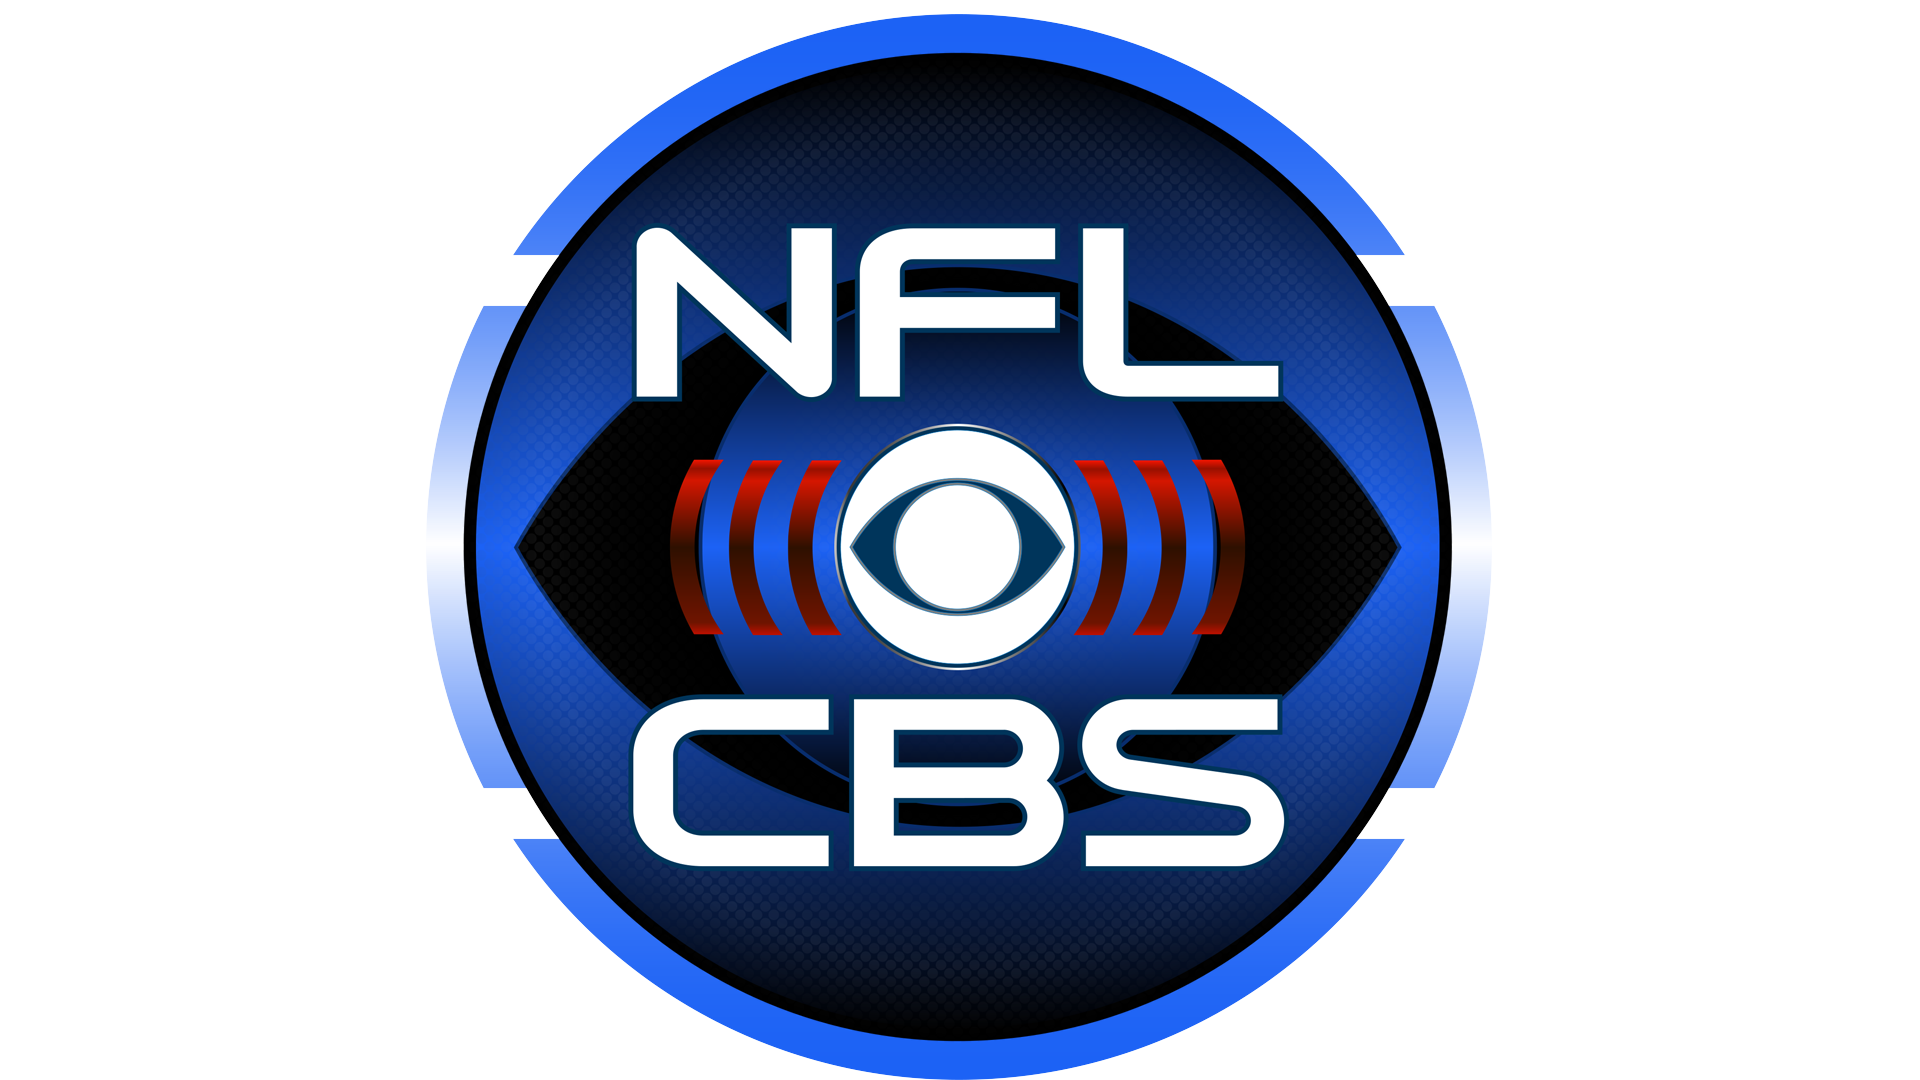 cbs-all-access-to-stream-nfl-games-through-2022-on-all-mobile-devices